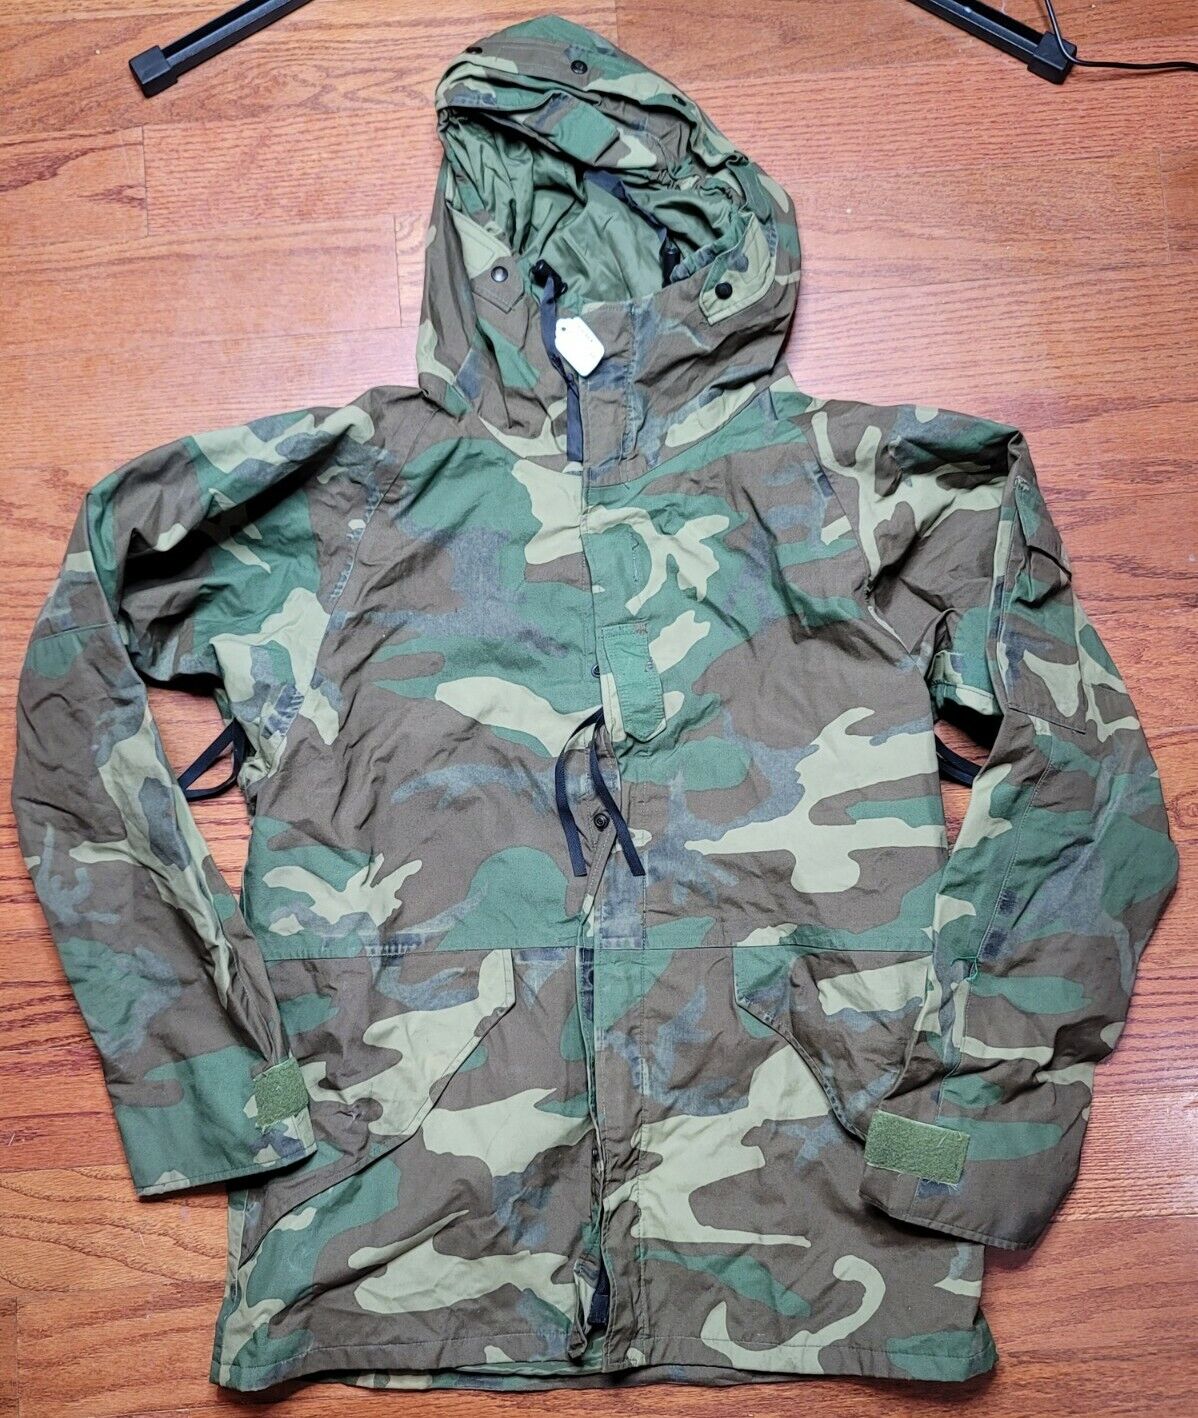 Tennessee Apparel ECWCS Woodland Camouflage Cold Weather Parka Mens Medium Long